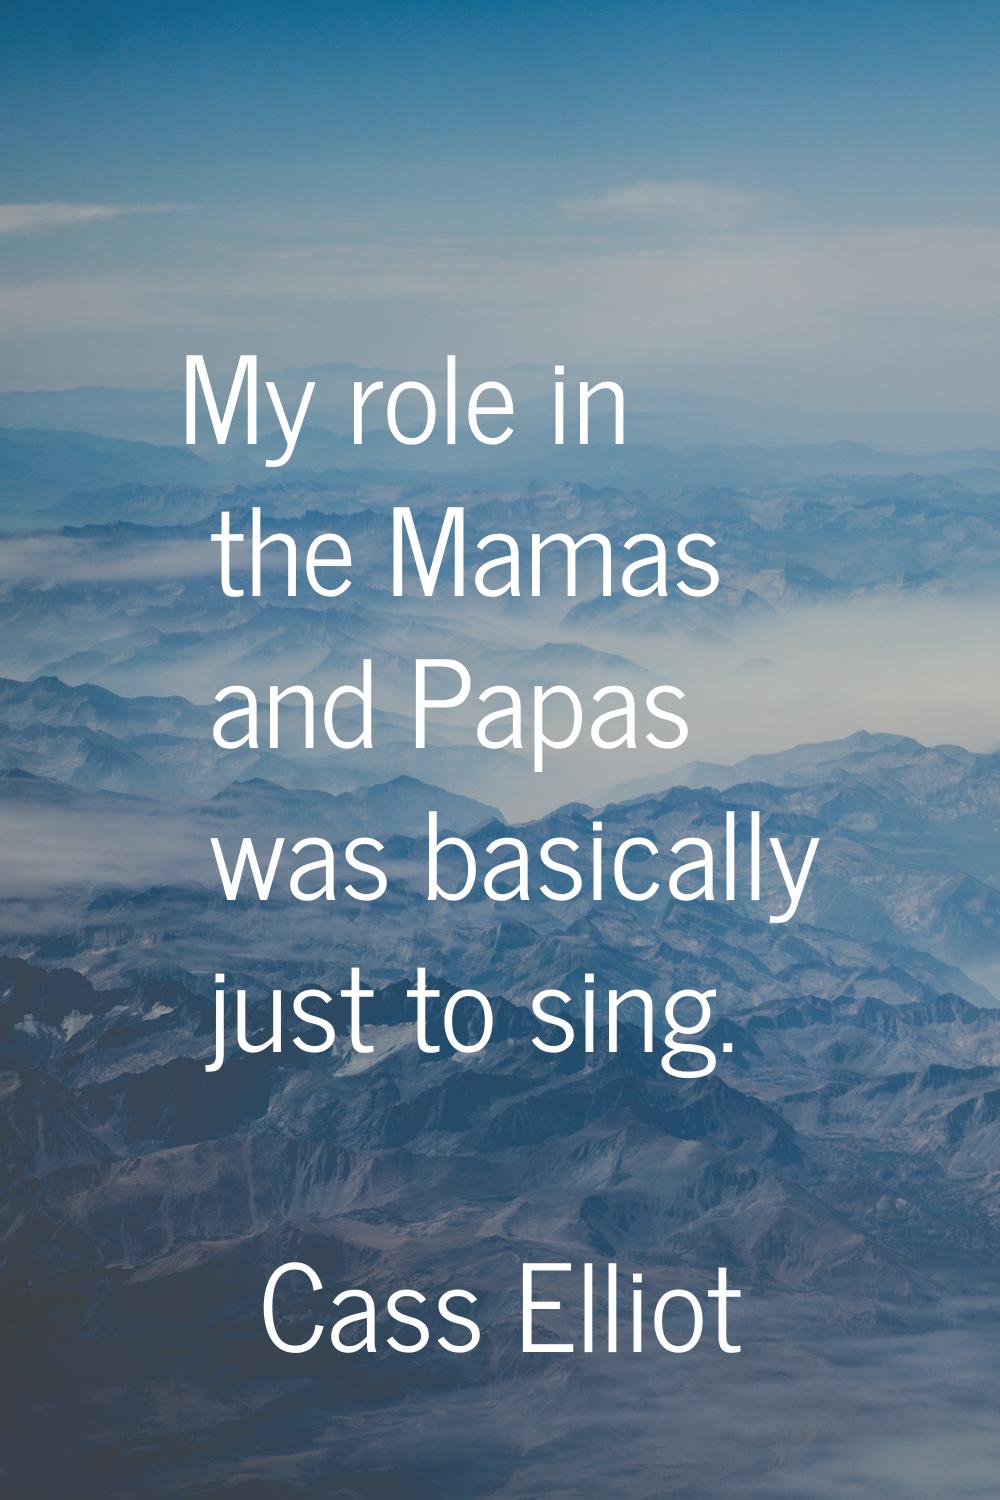 My role in the Mamas and Papas was basically just to sing.